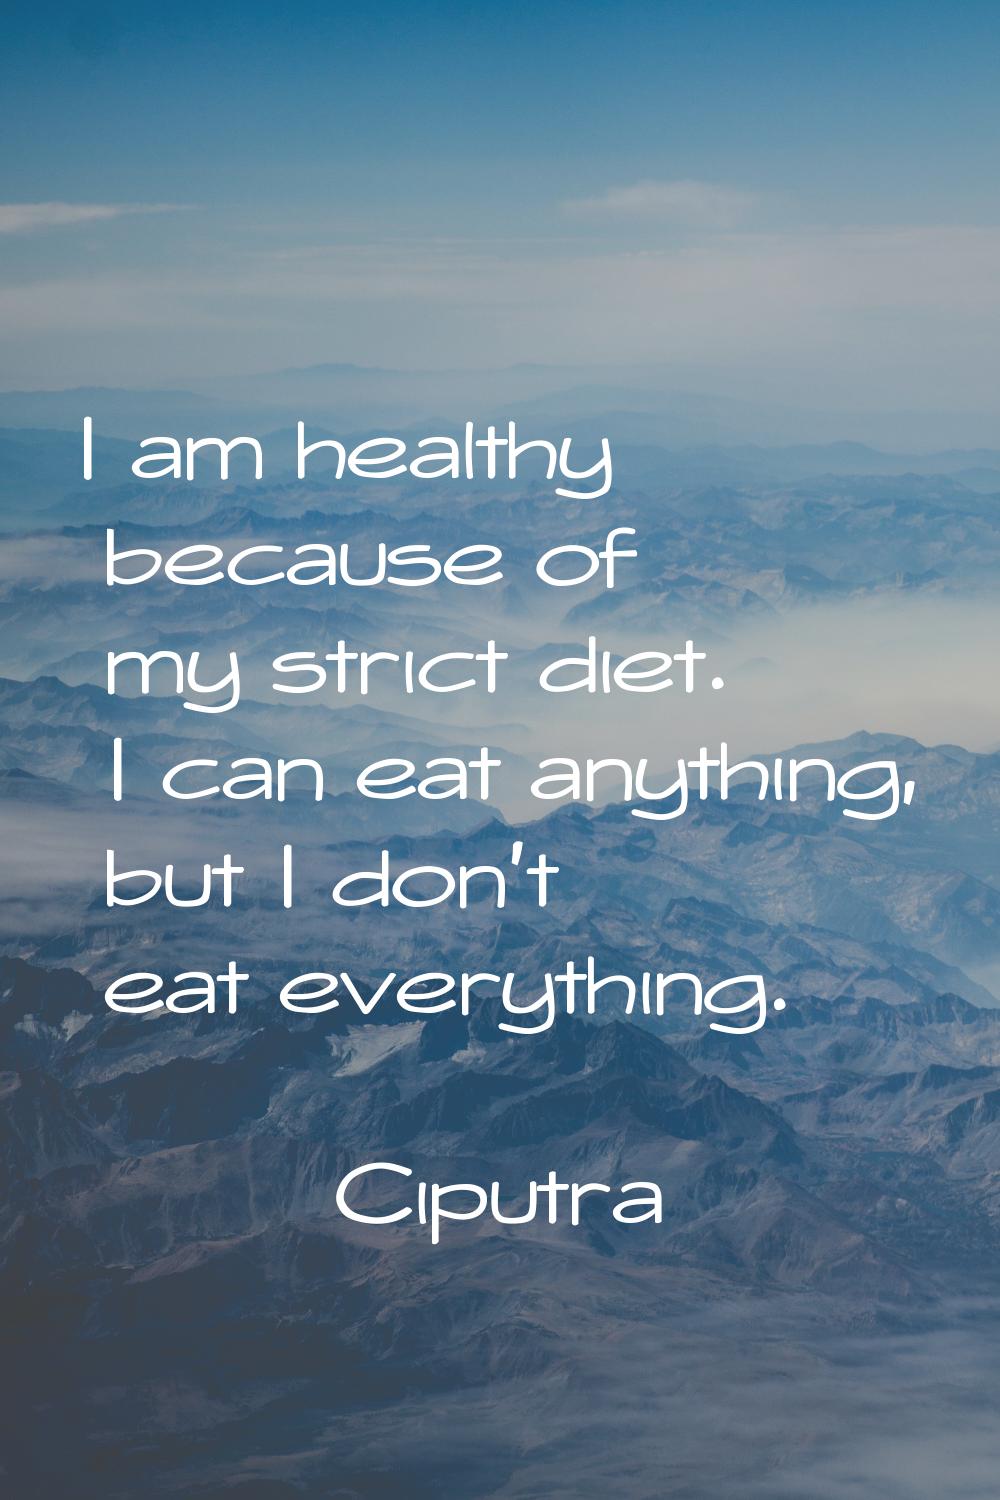 I am healthy because of my strict diet. I can eat anything, but I don't eat everything.